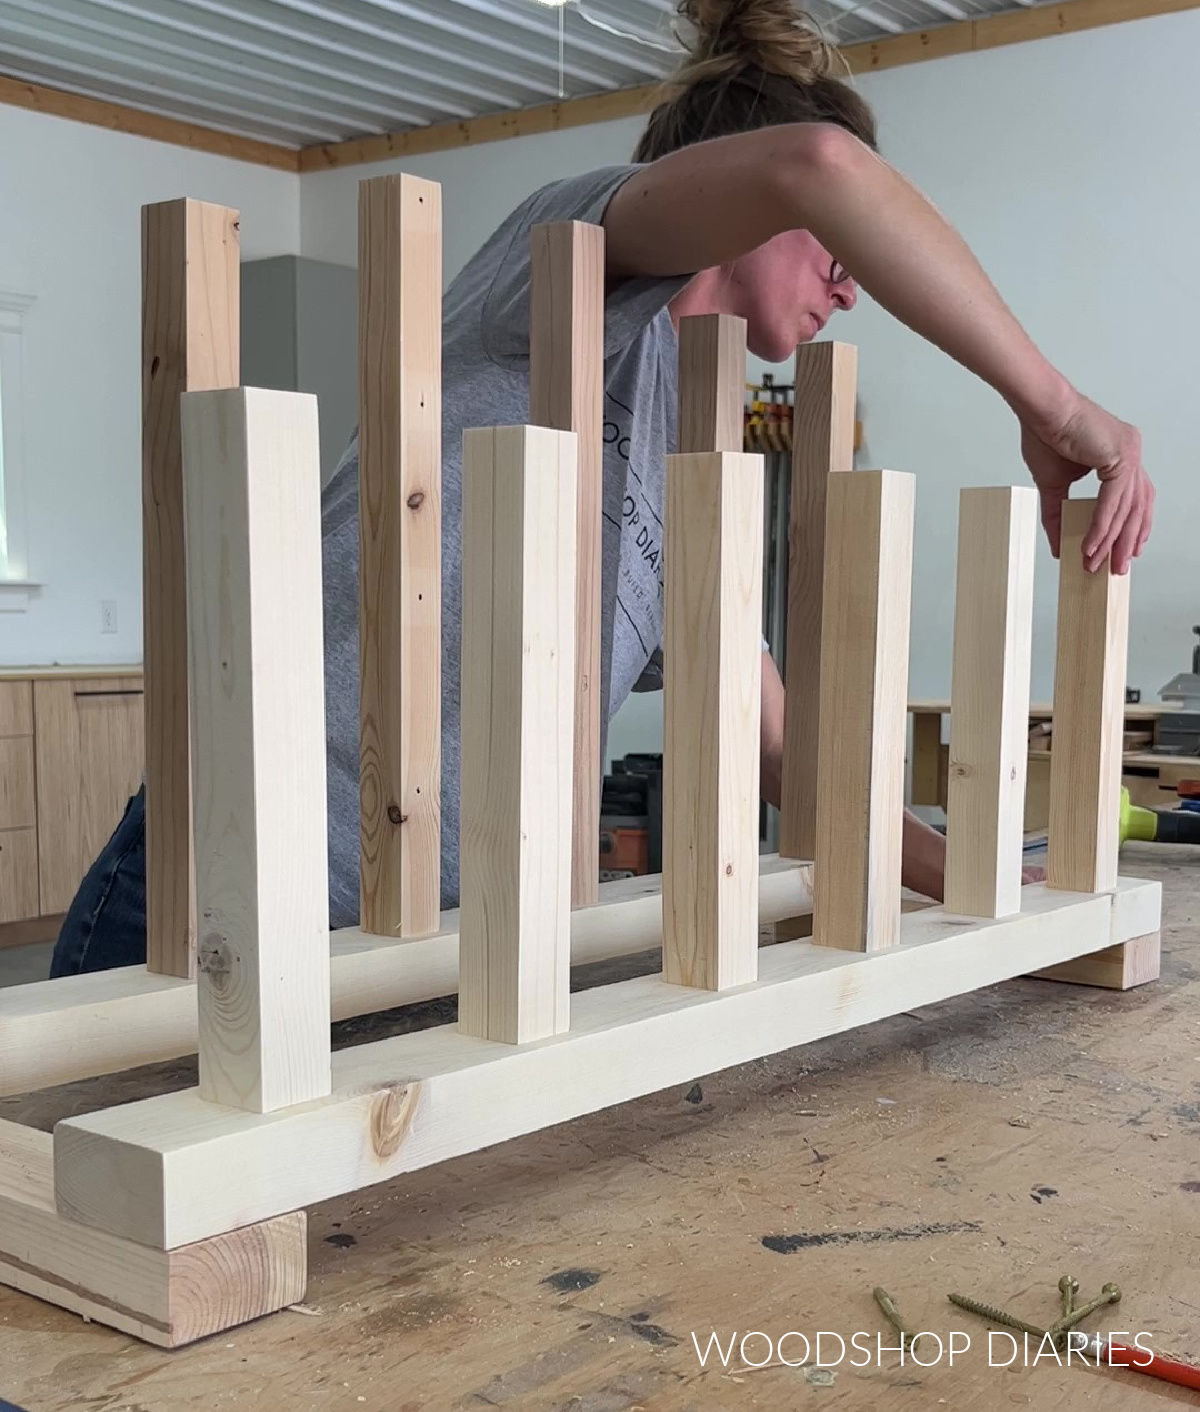 Shara Woodshop Diaries placing boot racks across base pieces on workbench